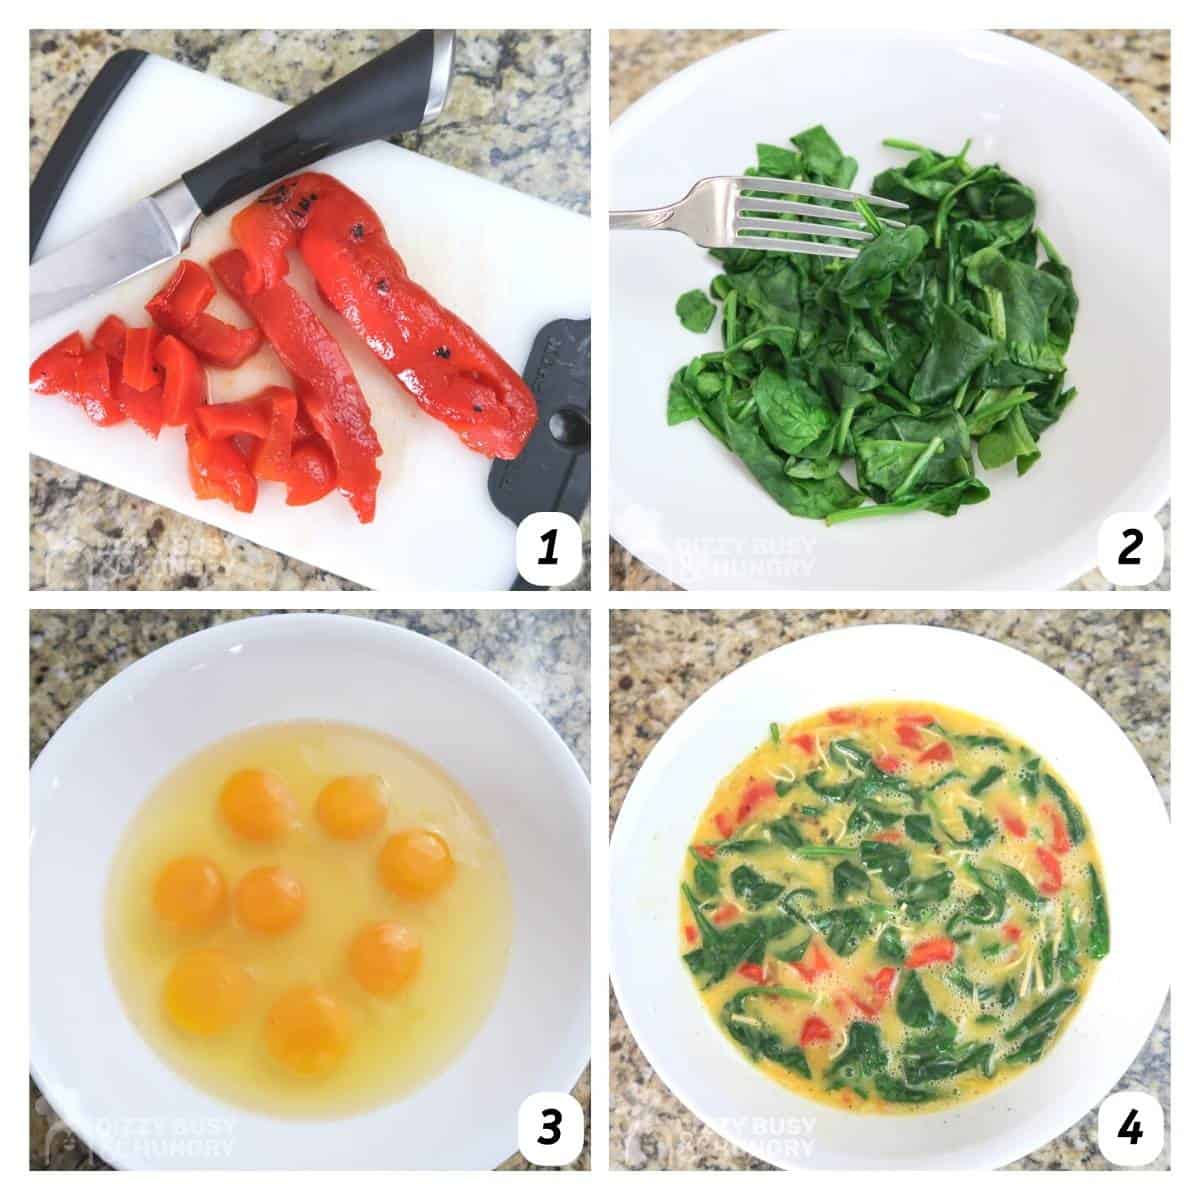 Four panel grid of process shots 1-4 - prepping vegetables and combining with eggs.